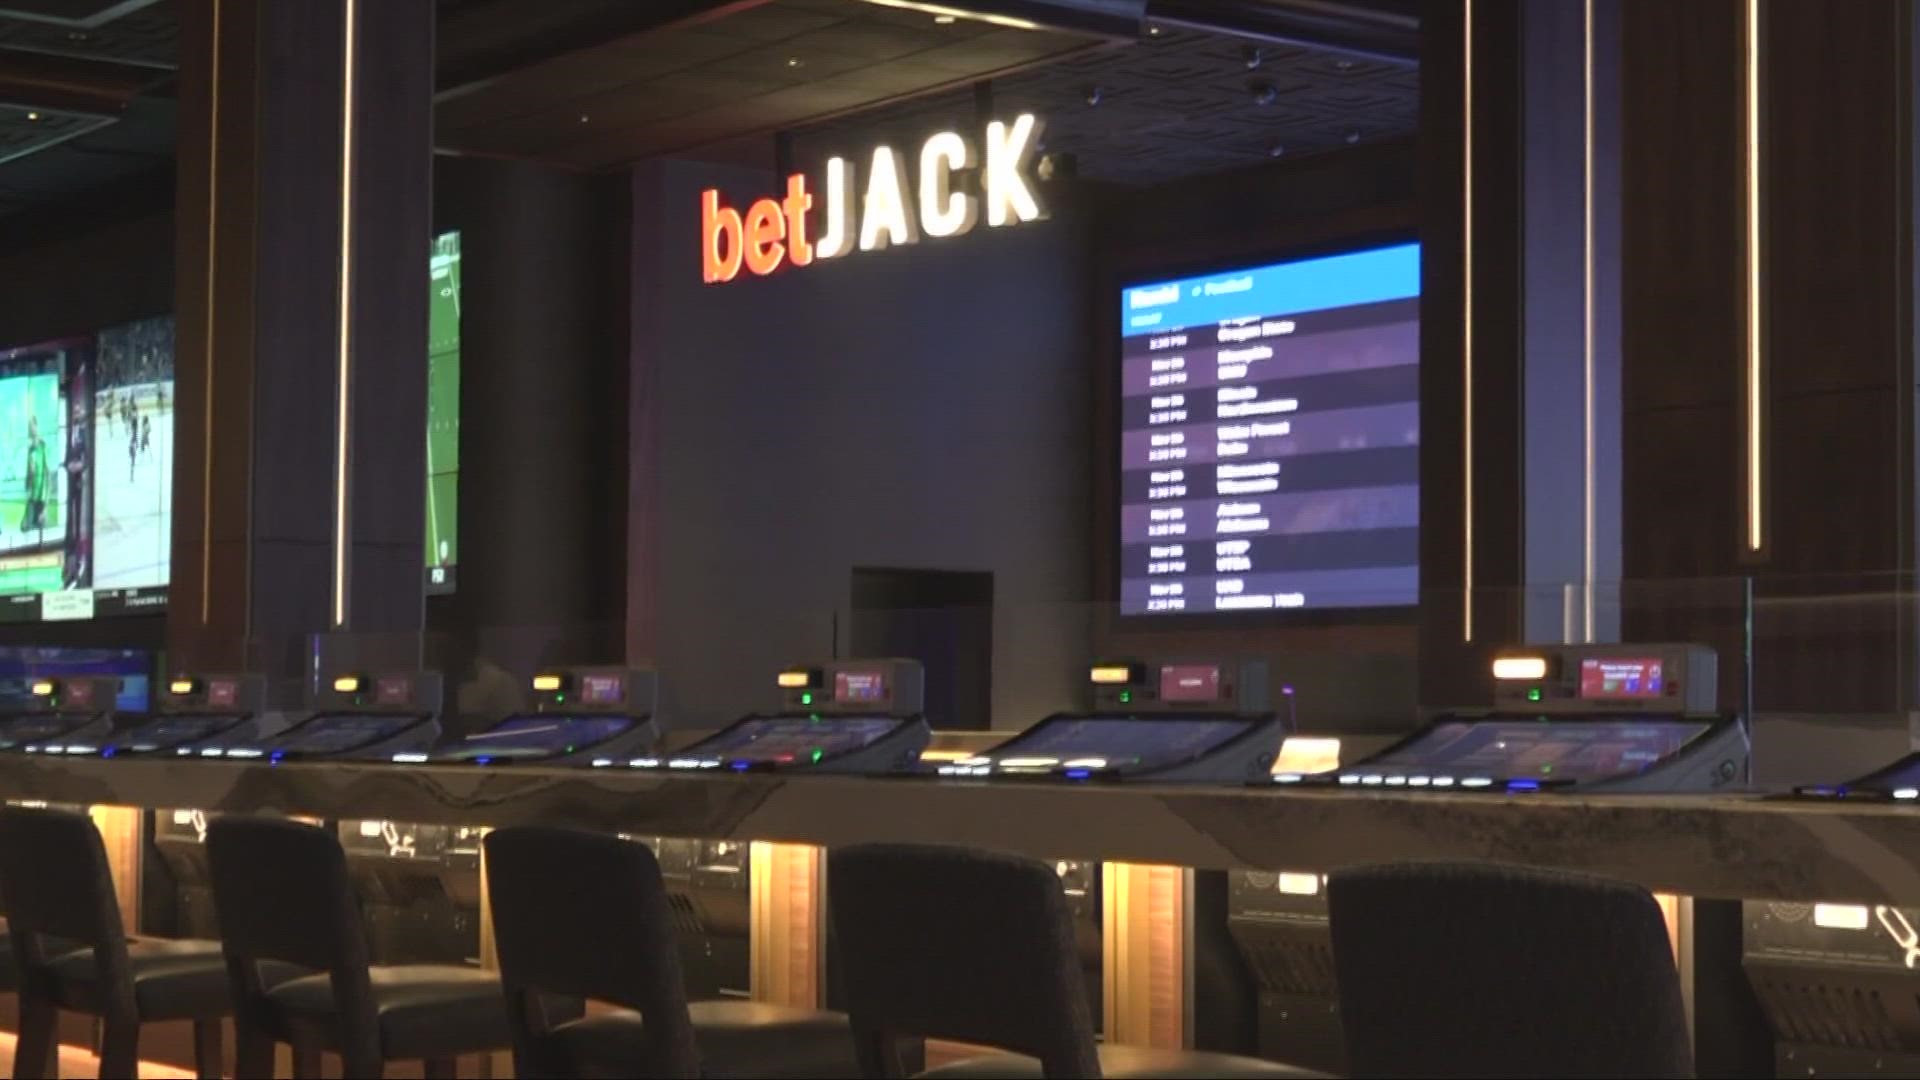 JACK Entertainment added a 6,000 square foot sportsbook inside the popular entertainment destination.